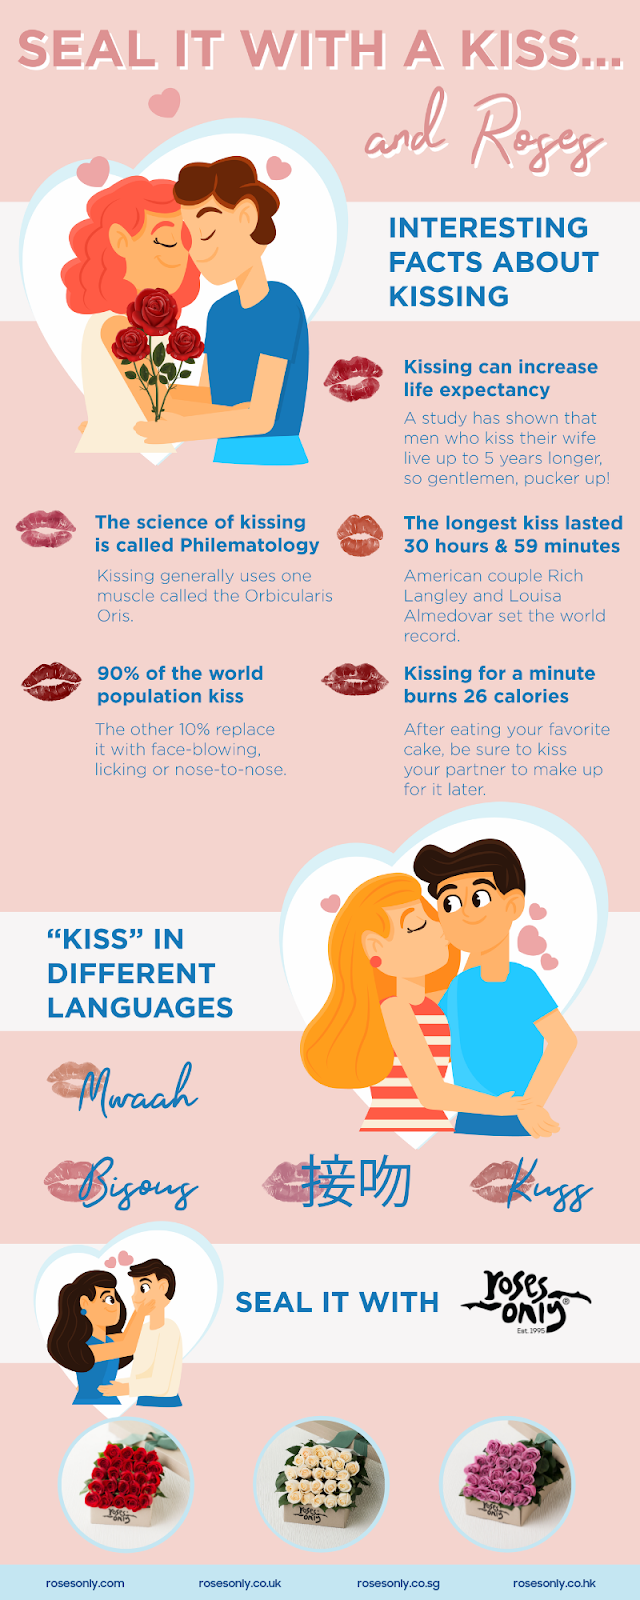 Interesting Facts About Kissing — Facts About Kissing Someone